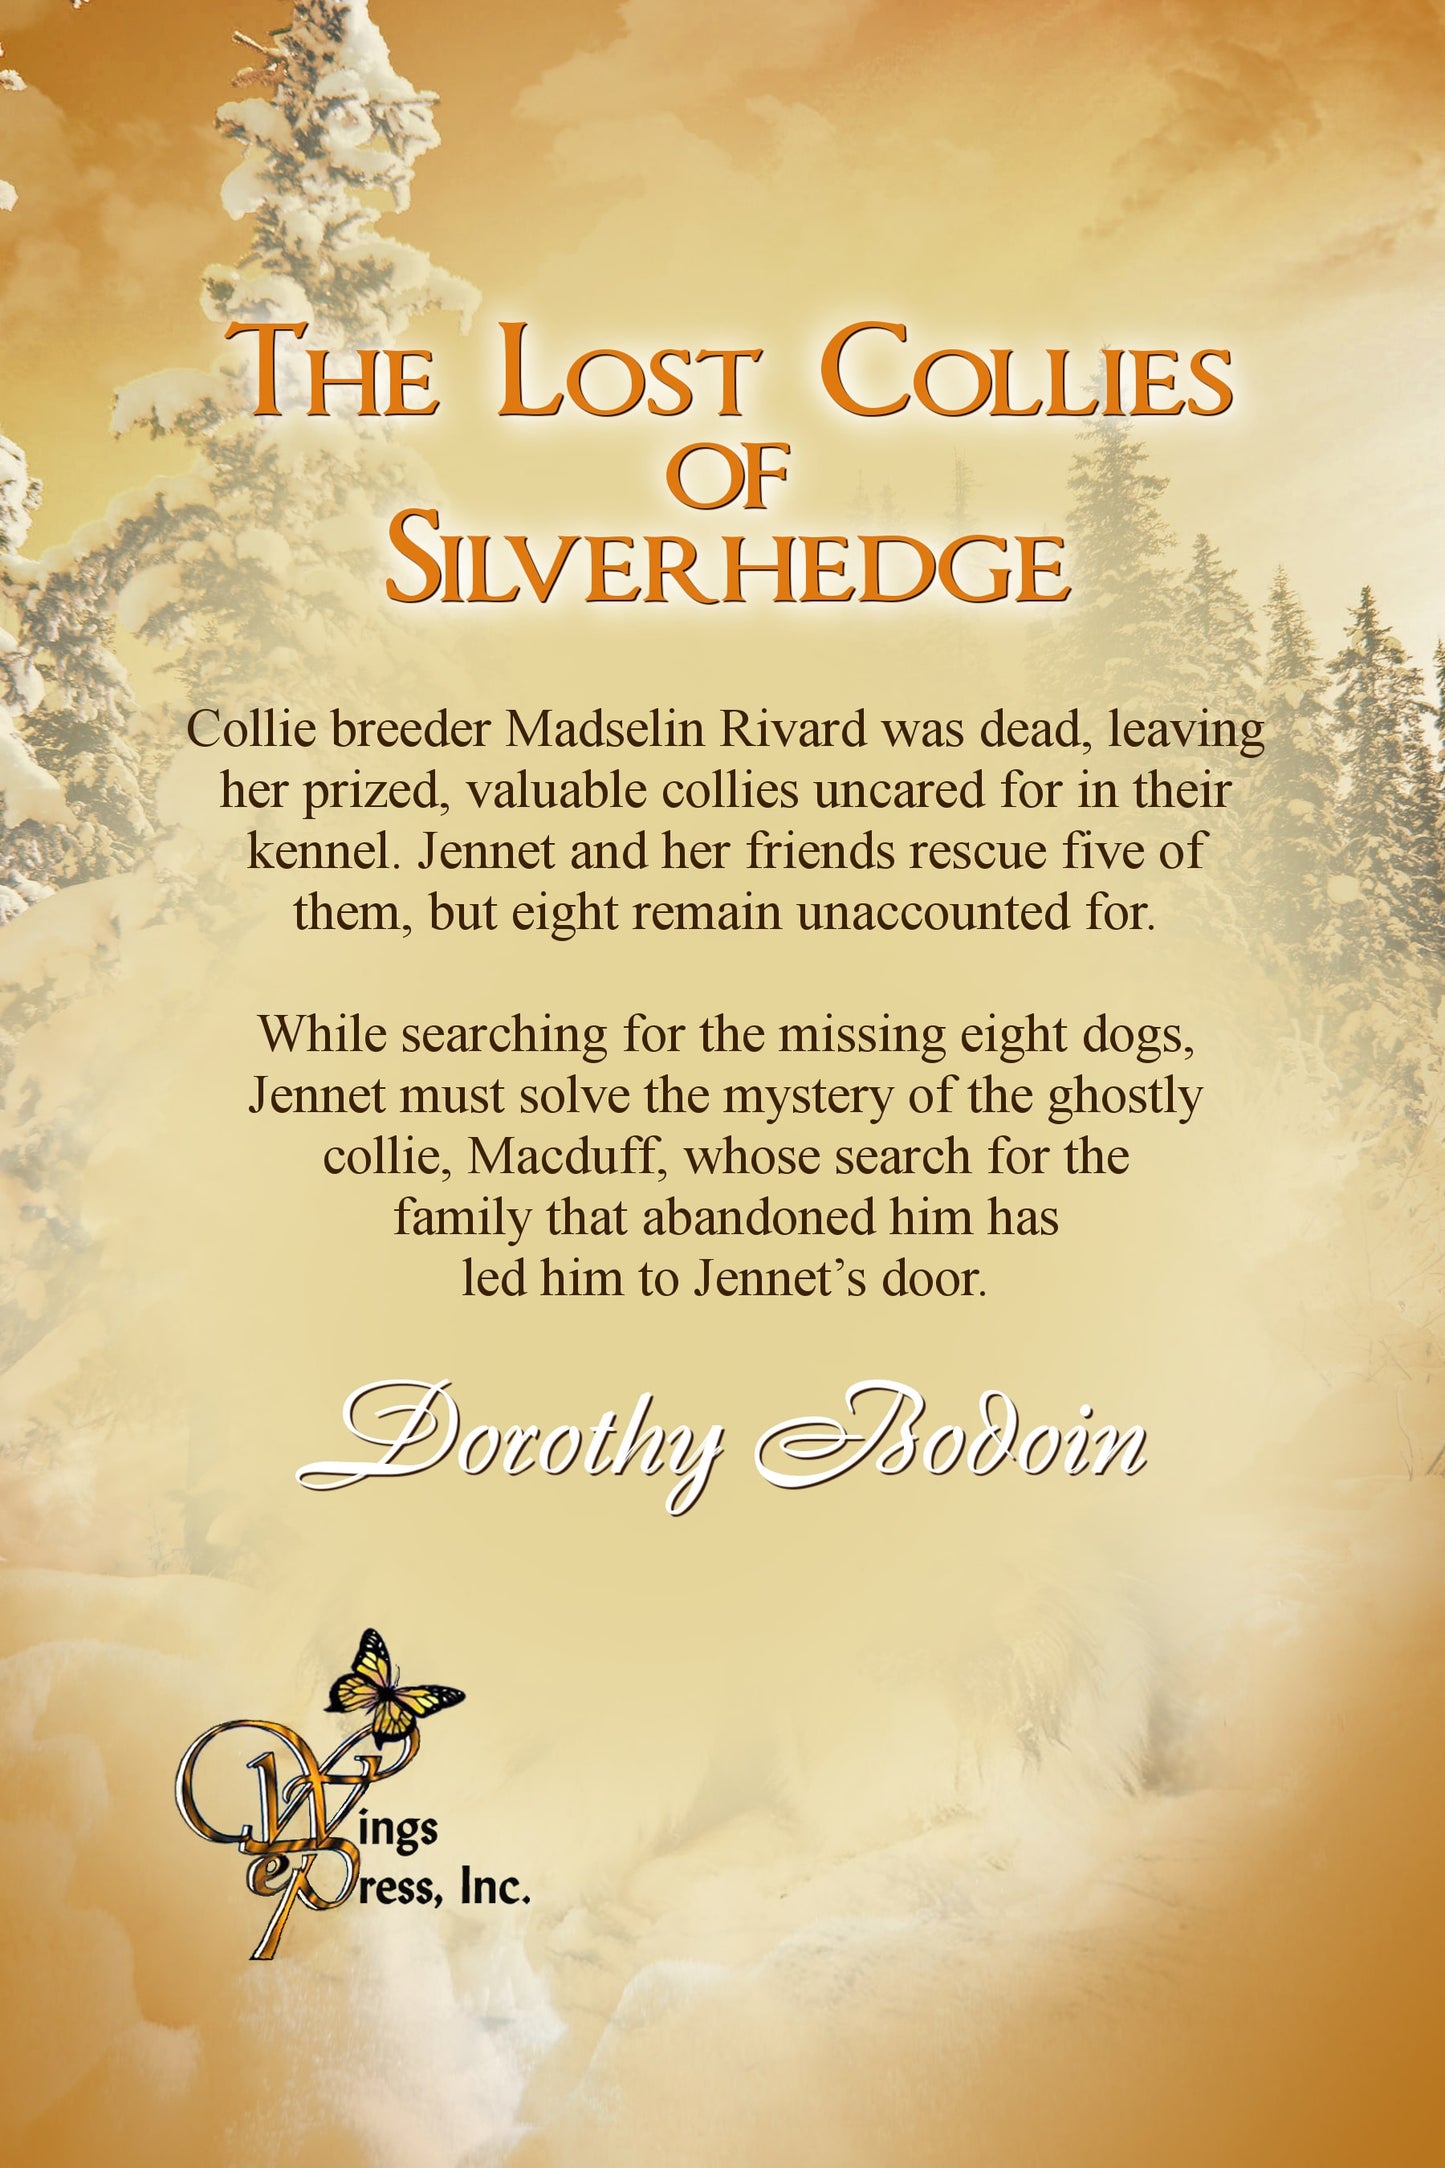 The Lost Collies of Silverhedge (The Foxglove Corners Series Book 26)